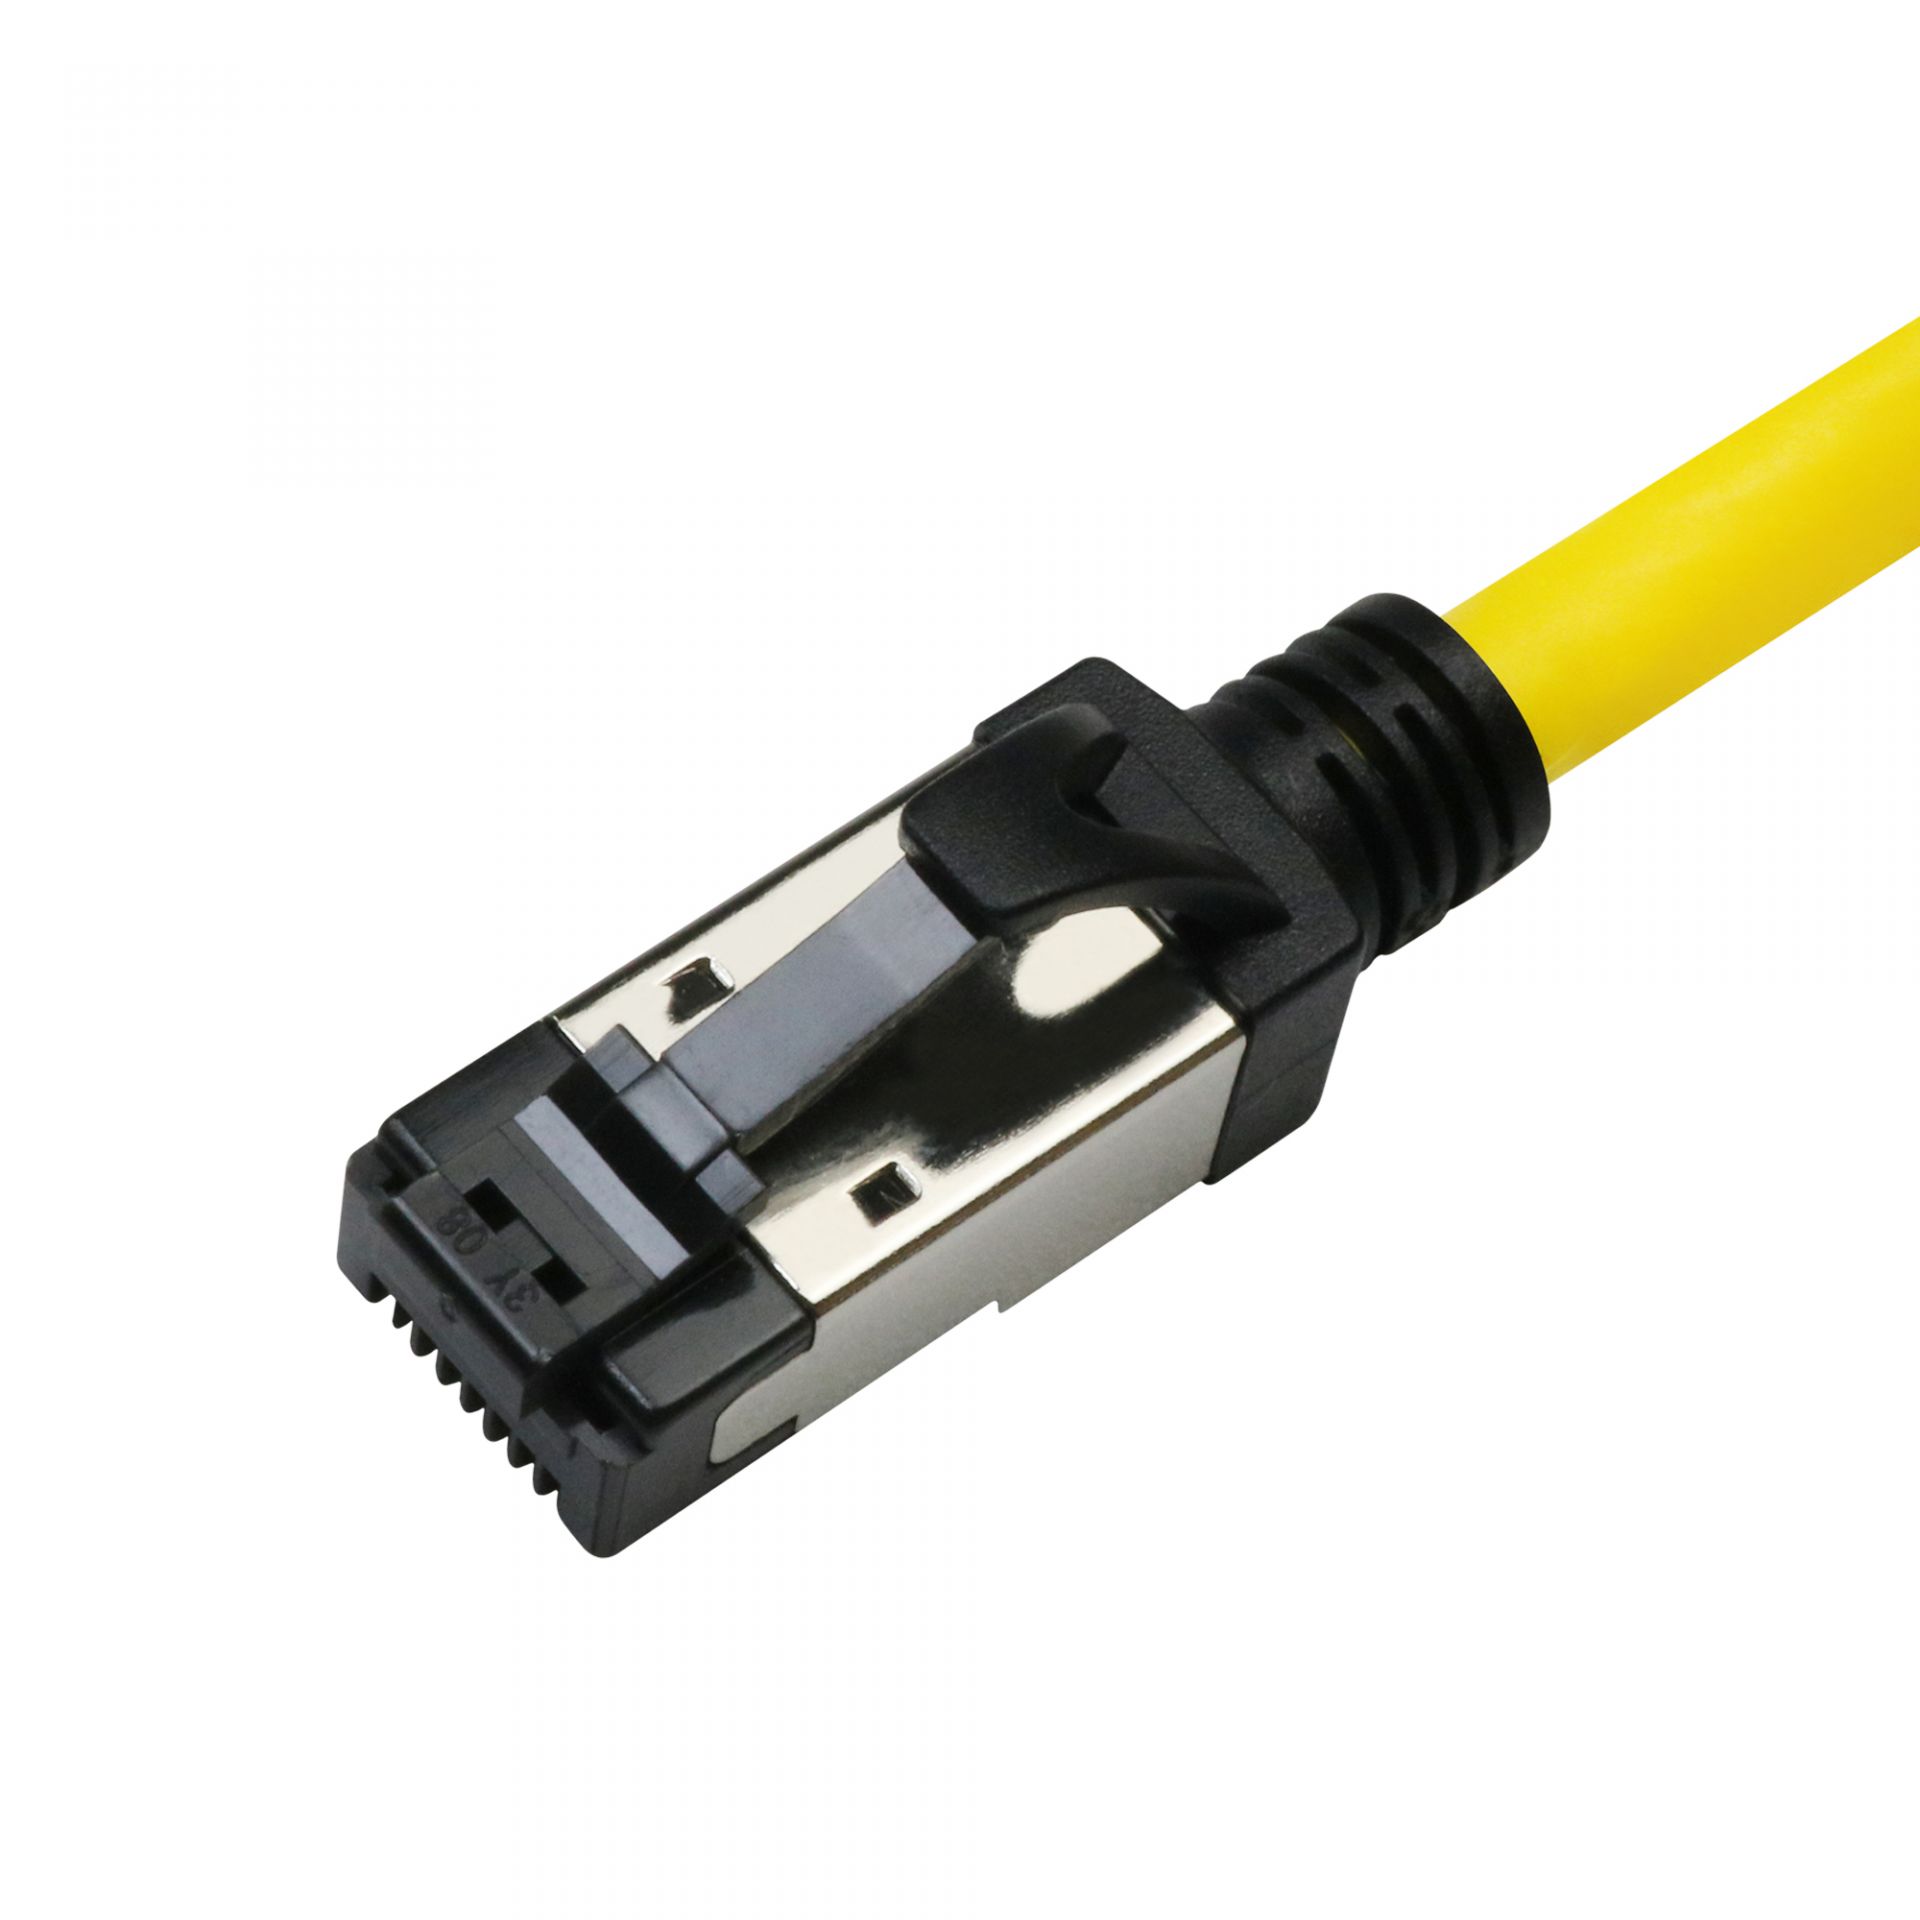 Future Proof With Cat8 Cables  RJ45 Connectors: Enhancing Network